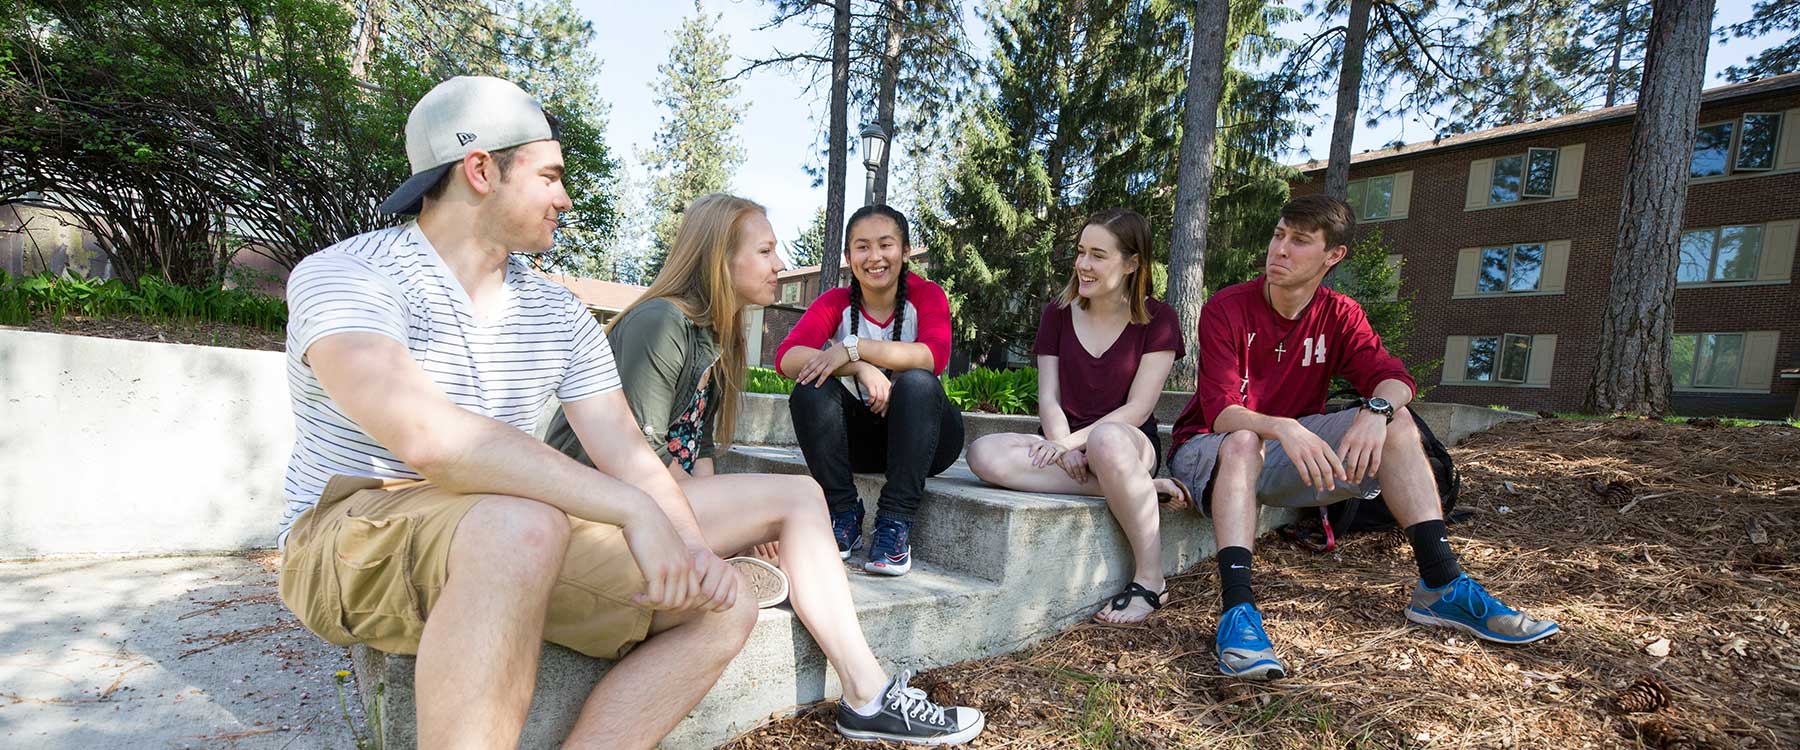 Five students sitting on steps outdoors, smiling and chatting, with trees and a building in the background.